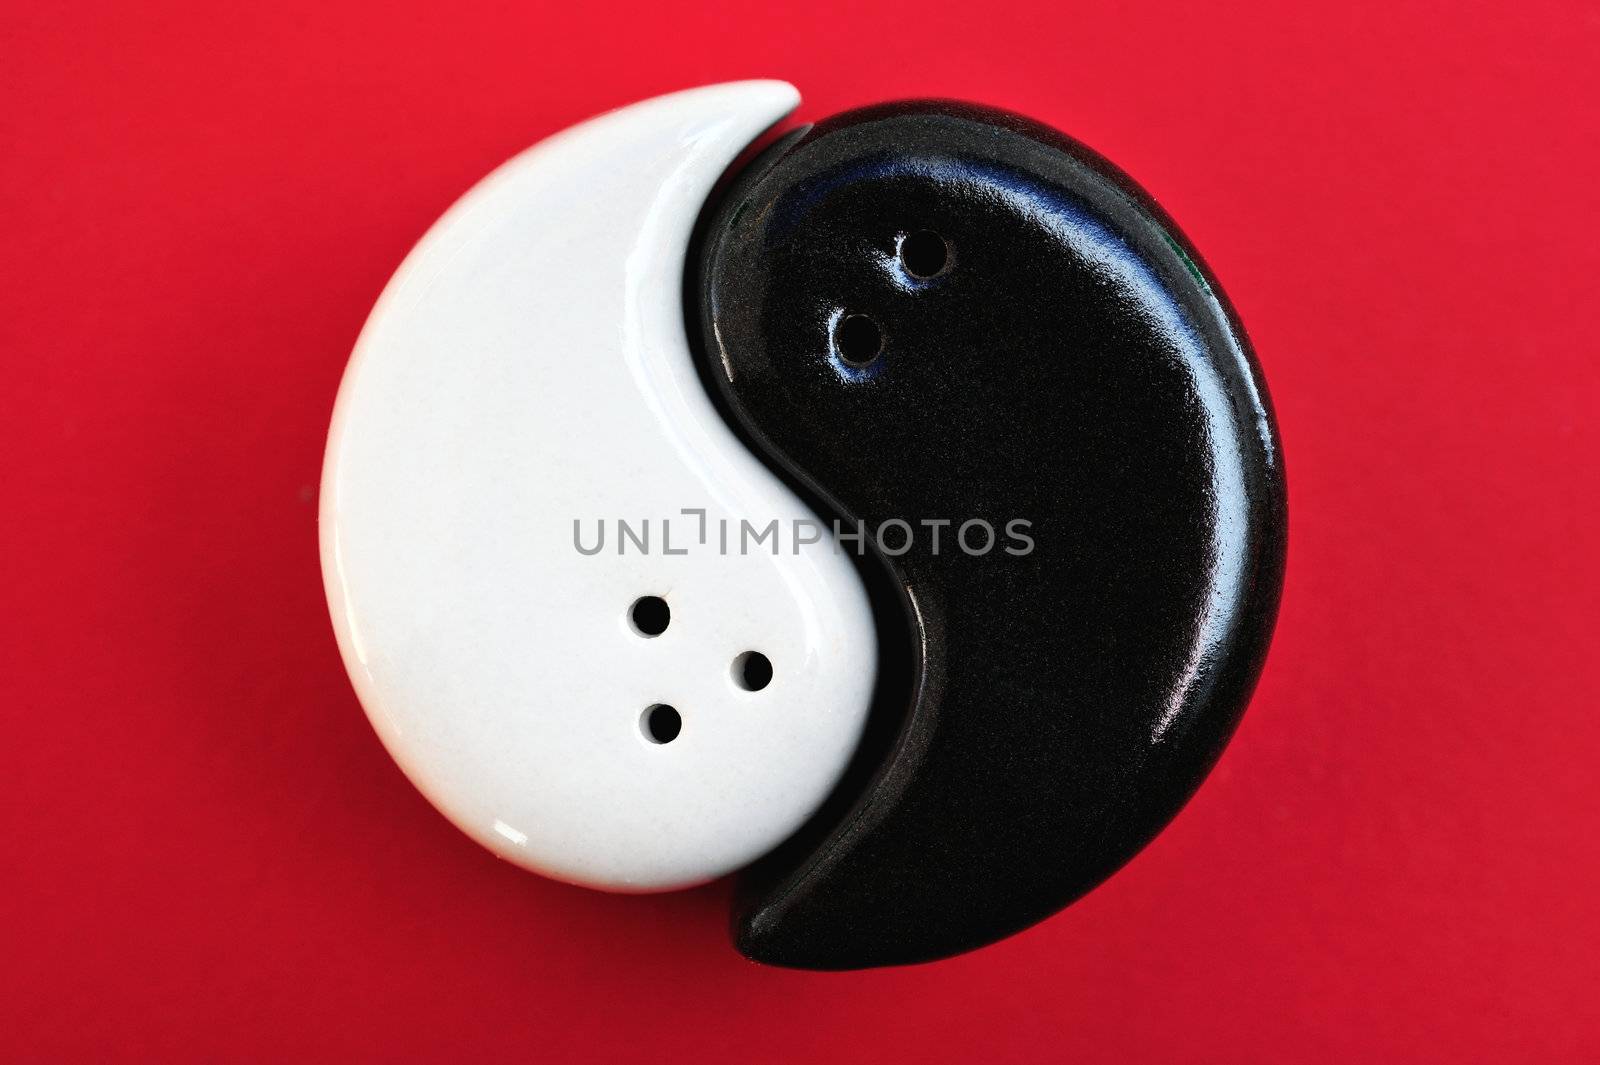 Graphic symbol of Ying and Yang, on a red background